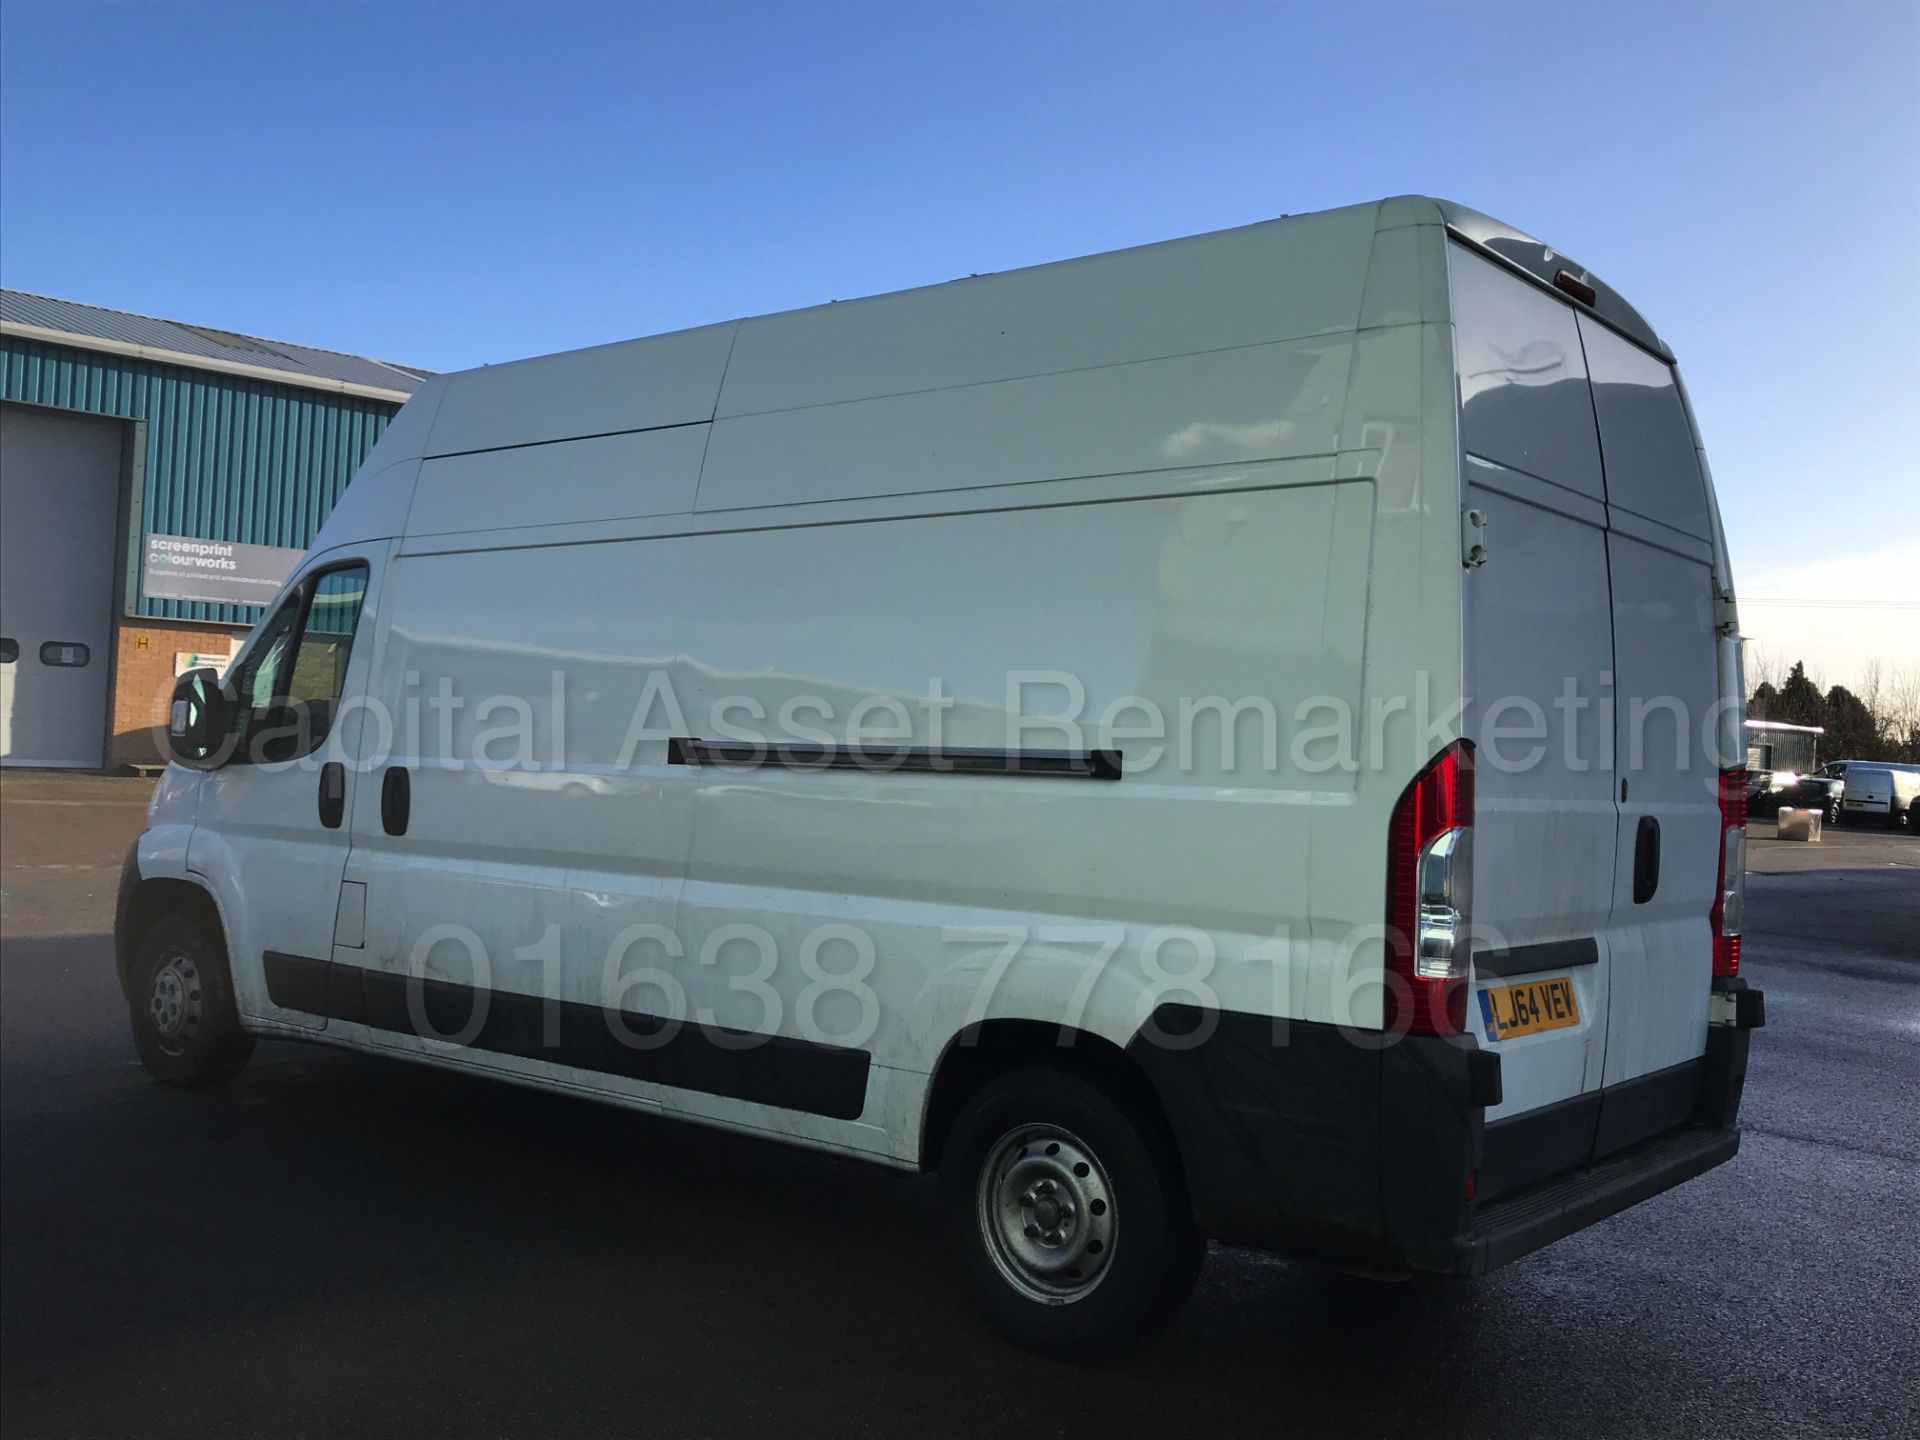 (On Sale) CITROEN RELAY 35 'LWB - EXTRA HI-ROOF' (2015 MODEL) '2.2 HDI - 130 BHP - 6 SPEED' - Image 7 of 24